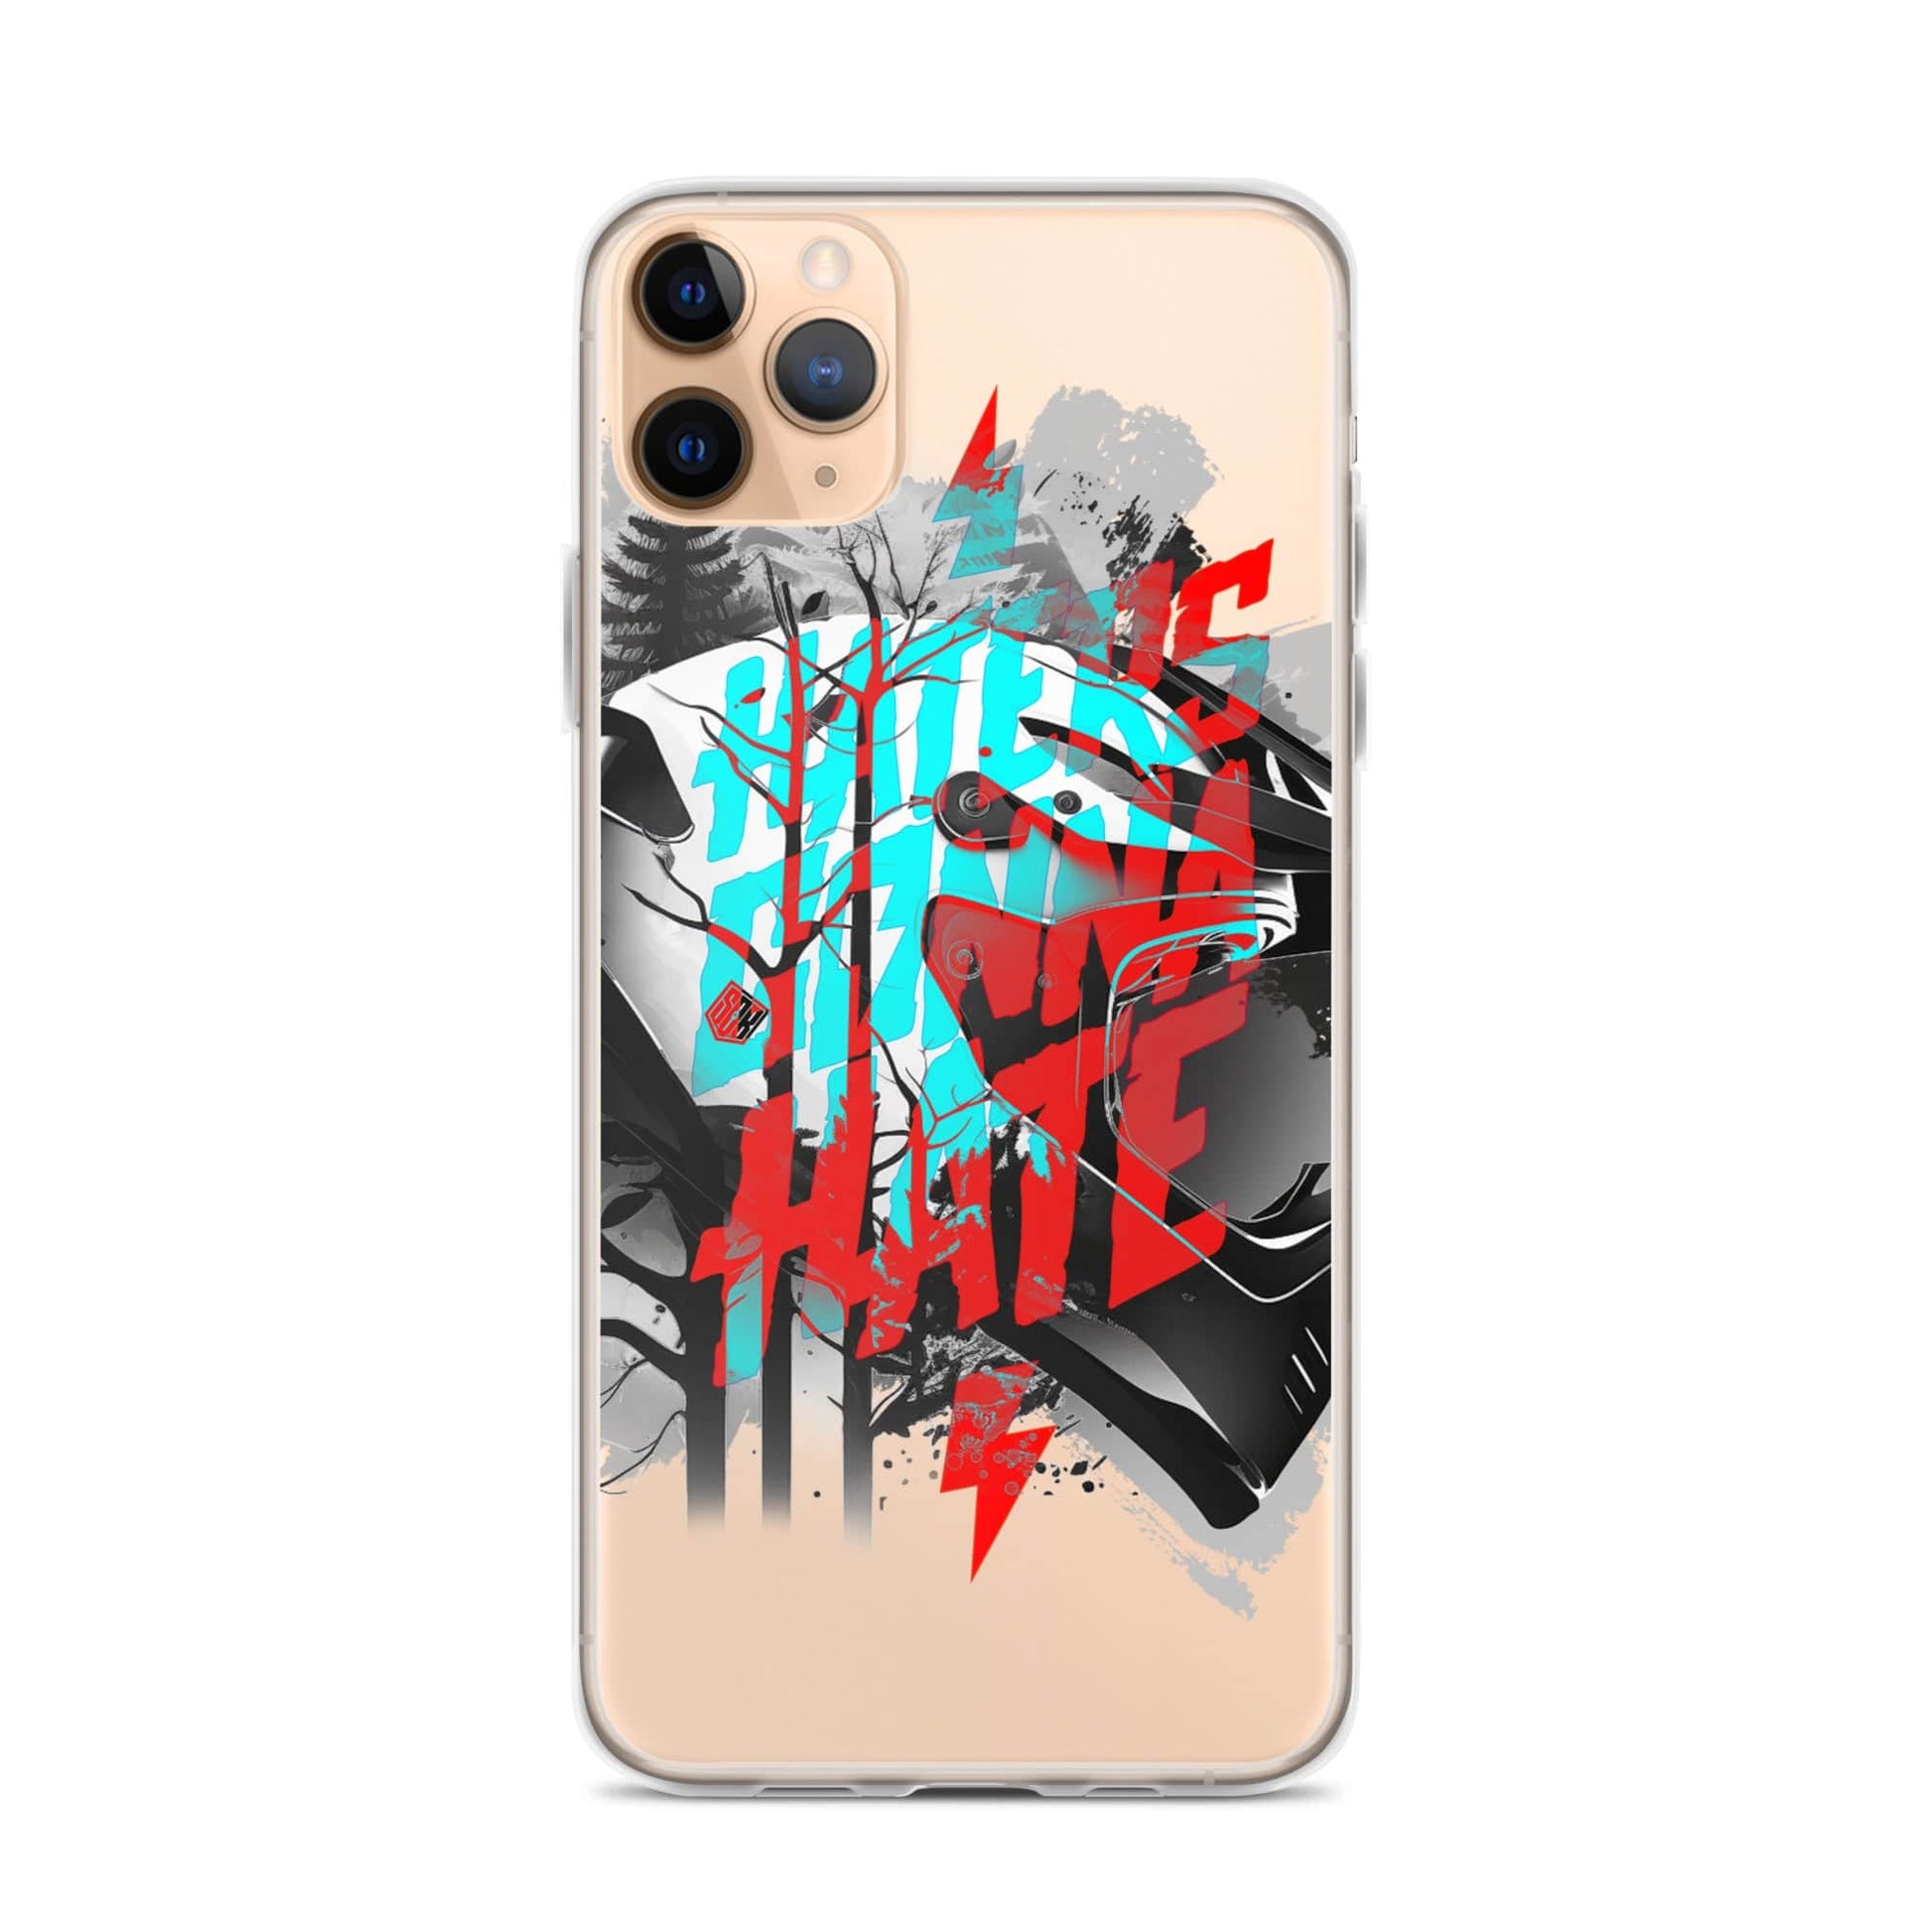 Sons of Battery® - E-MTB Brand & Community iPhone 11 Pro Max Haters gonna hate - iPhone-Hülle E-Bike-Community